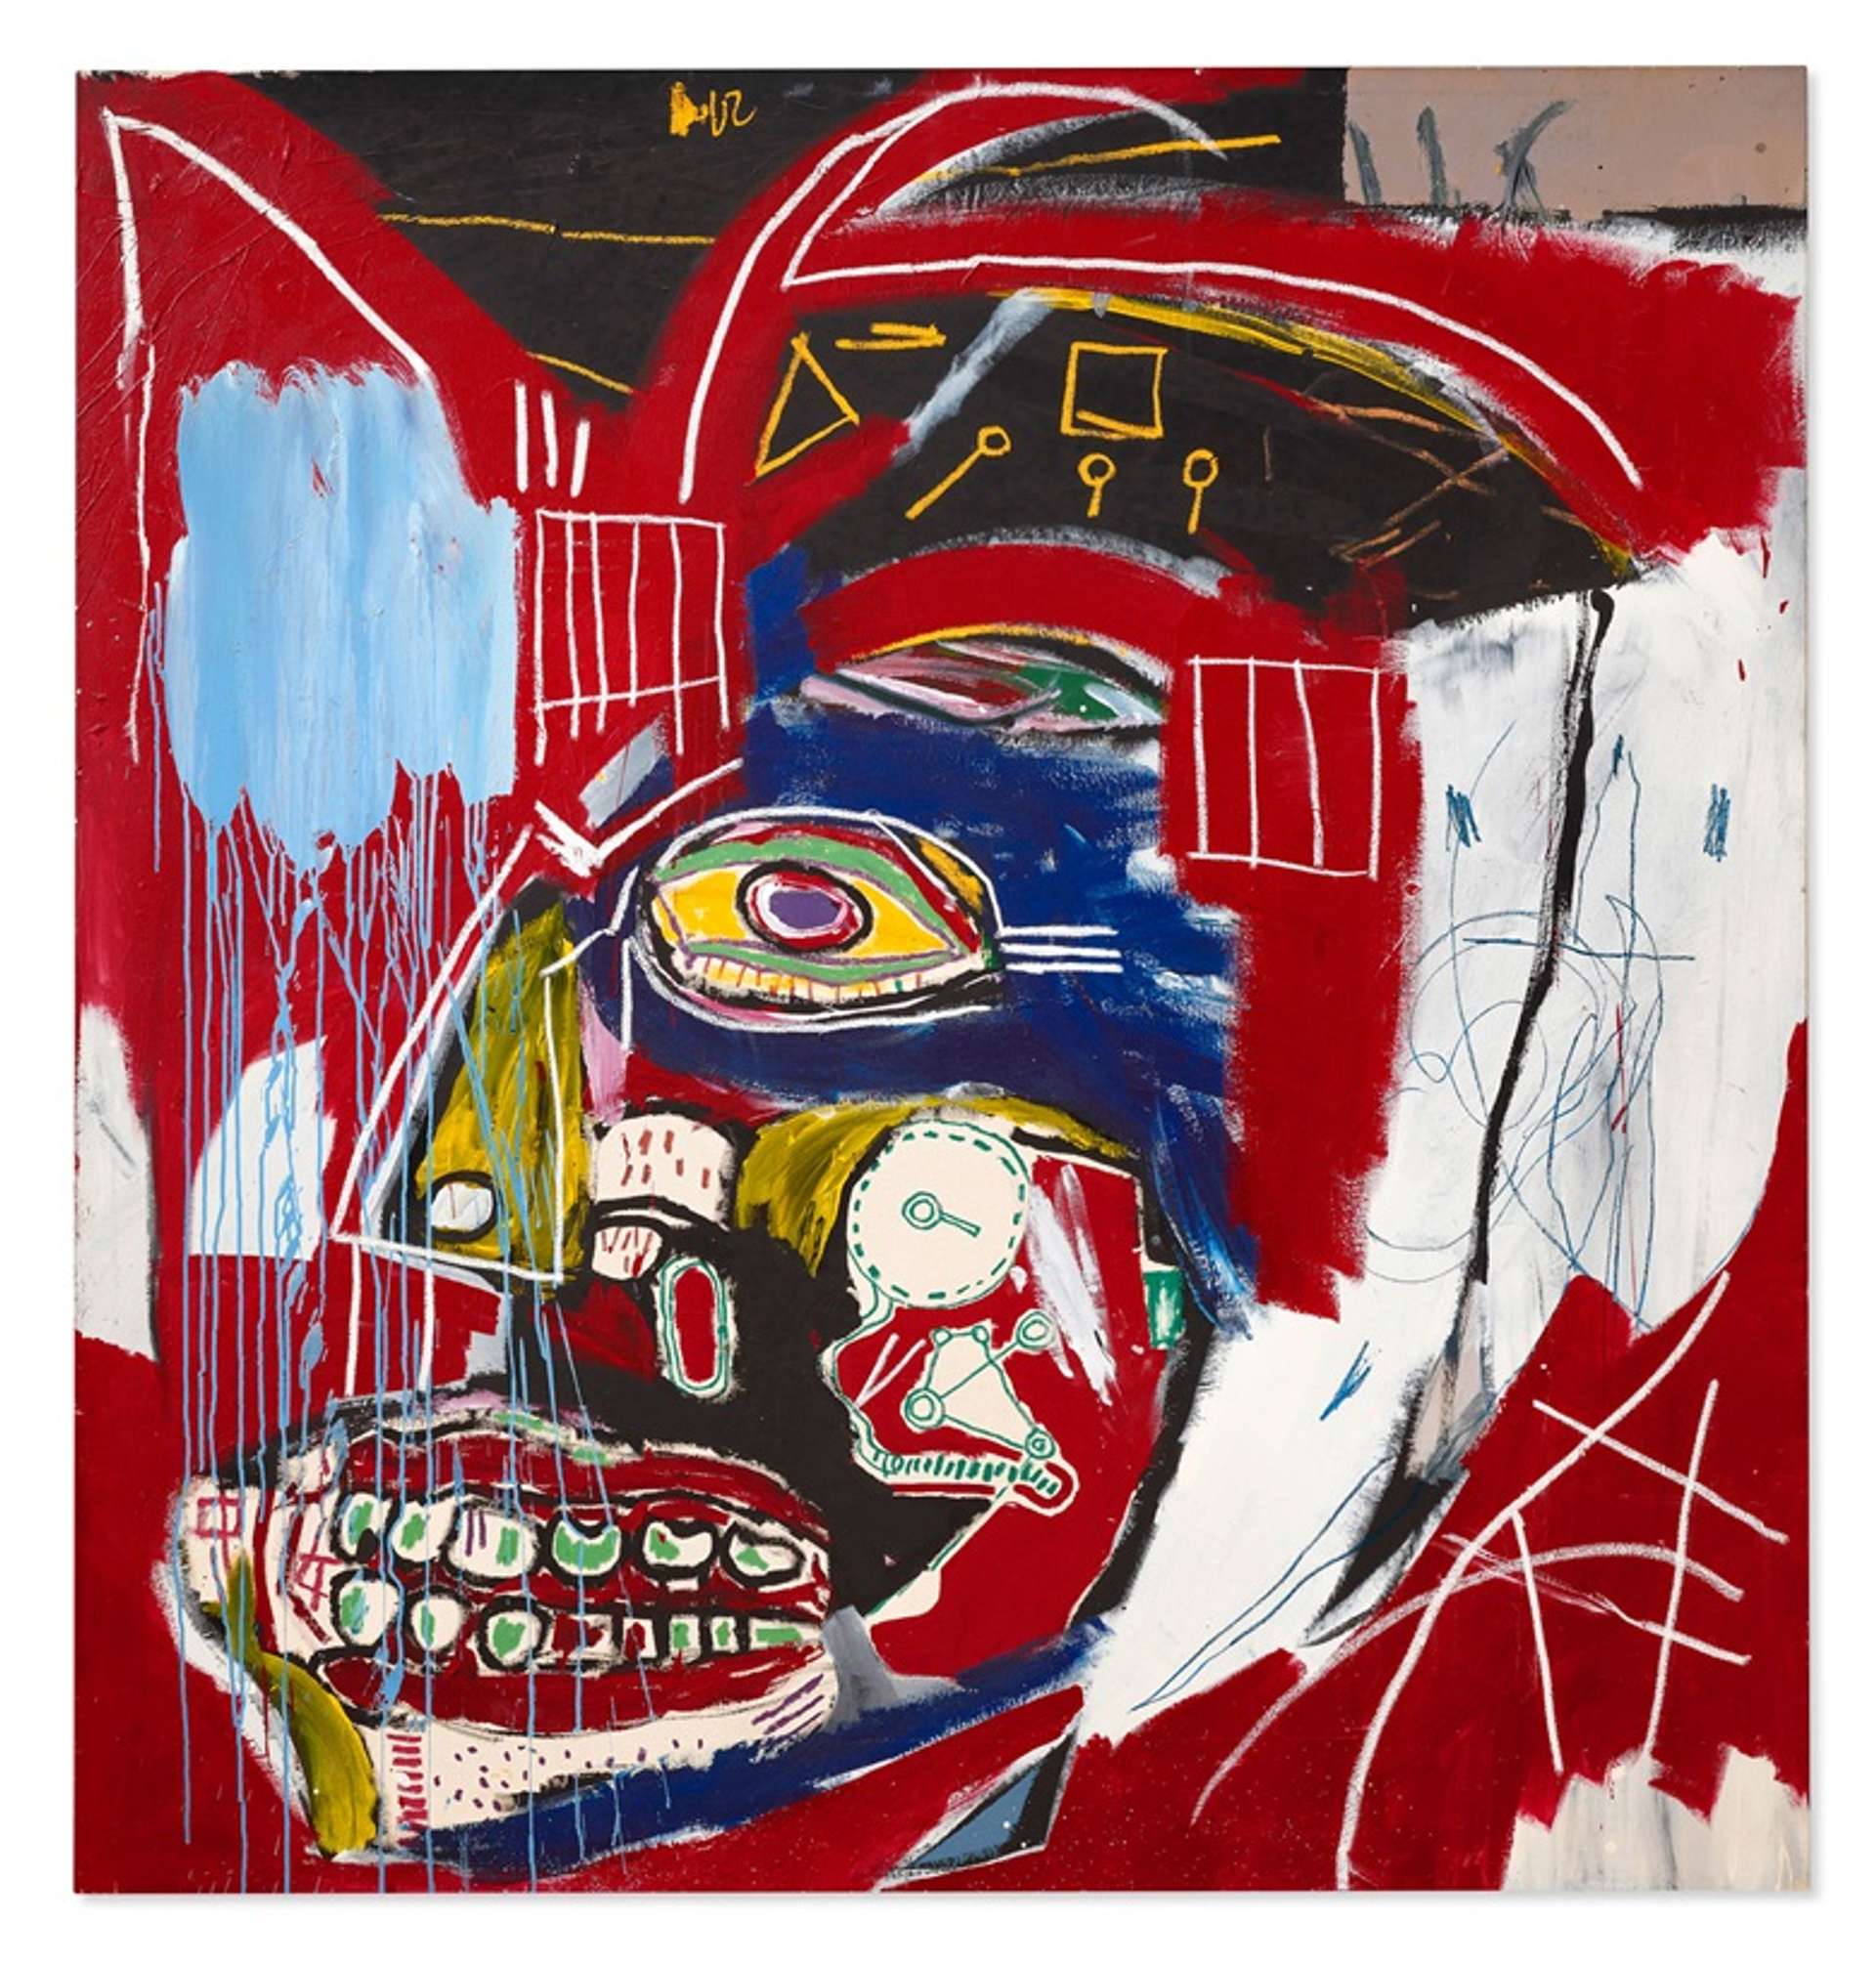 Jean-Michele Basquiat’s In This Case. A Neo-Expressionist style of a head against a red background with additional symbols. 